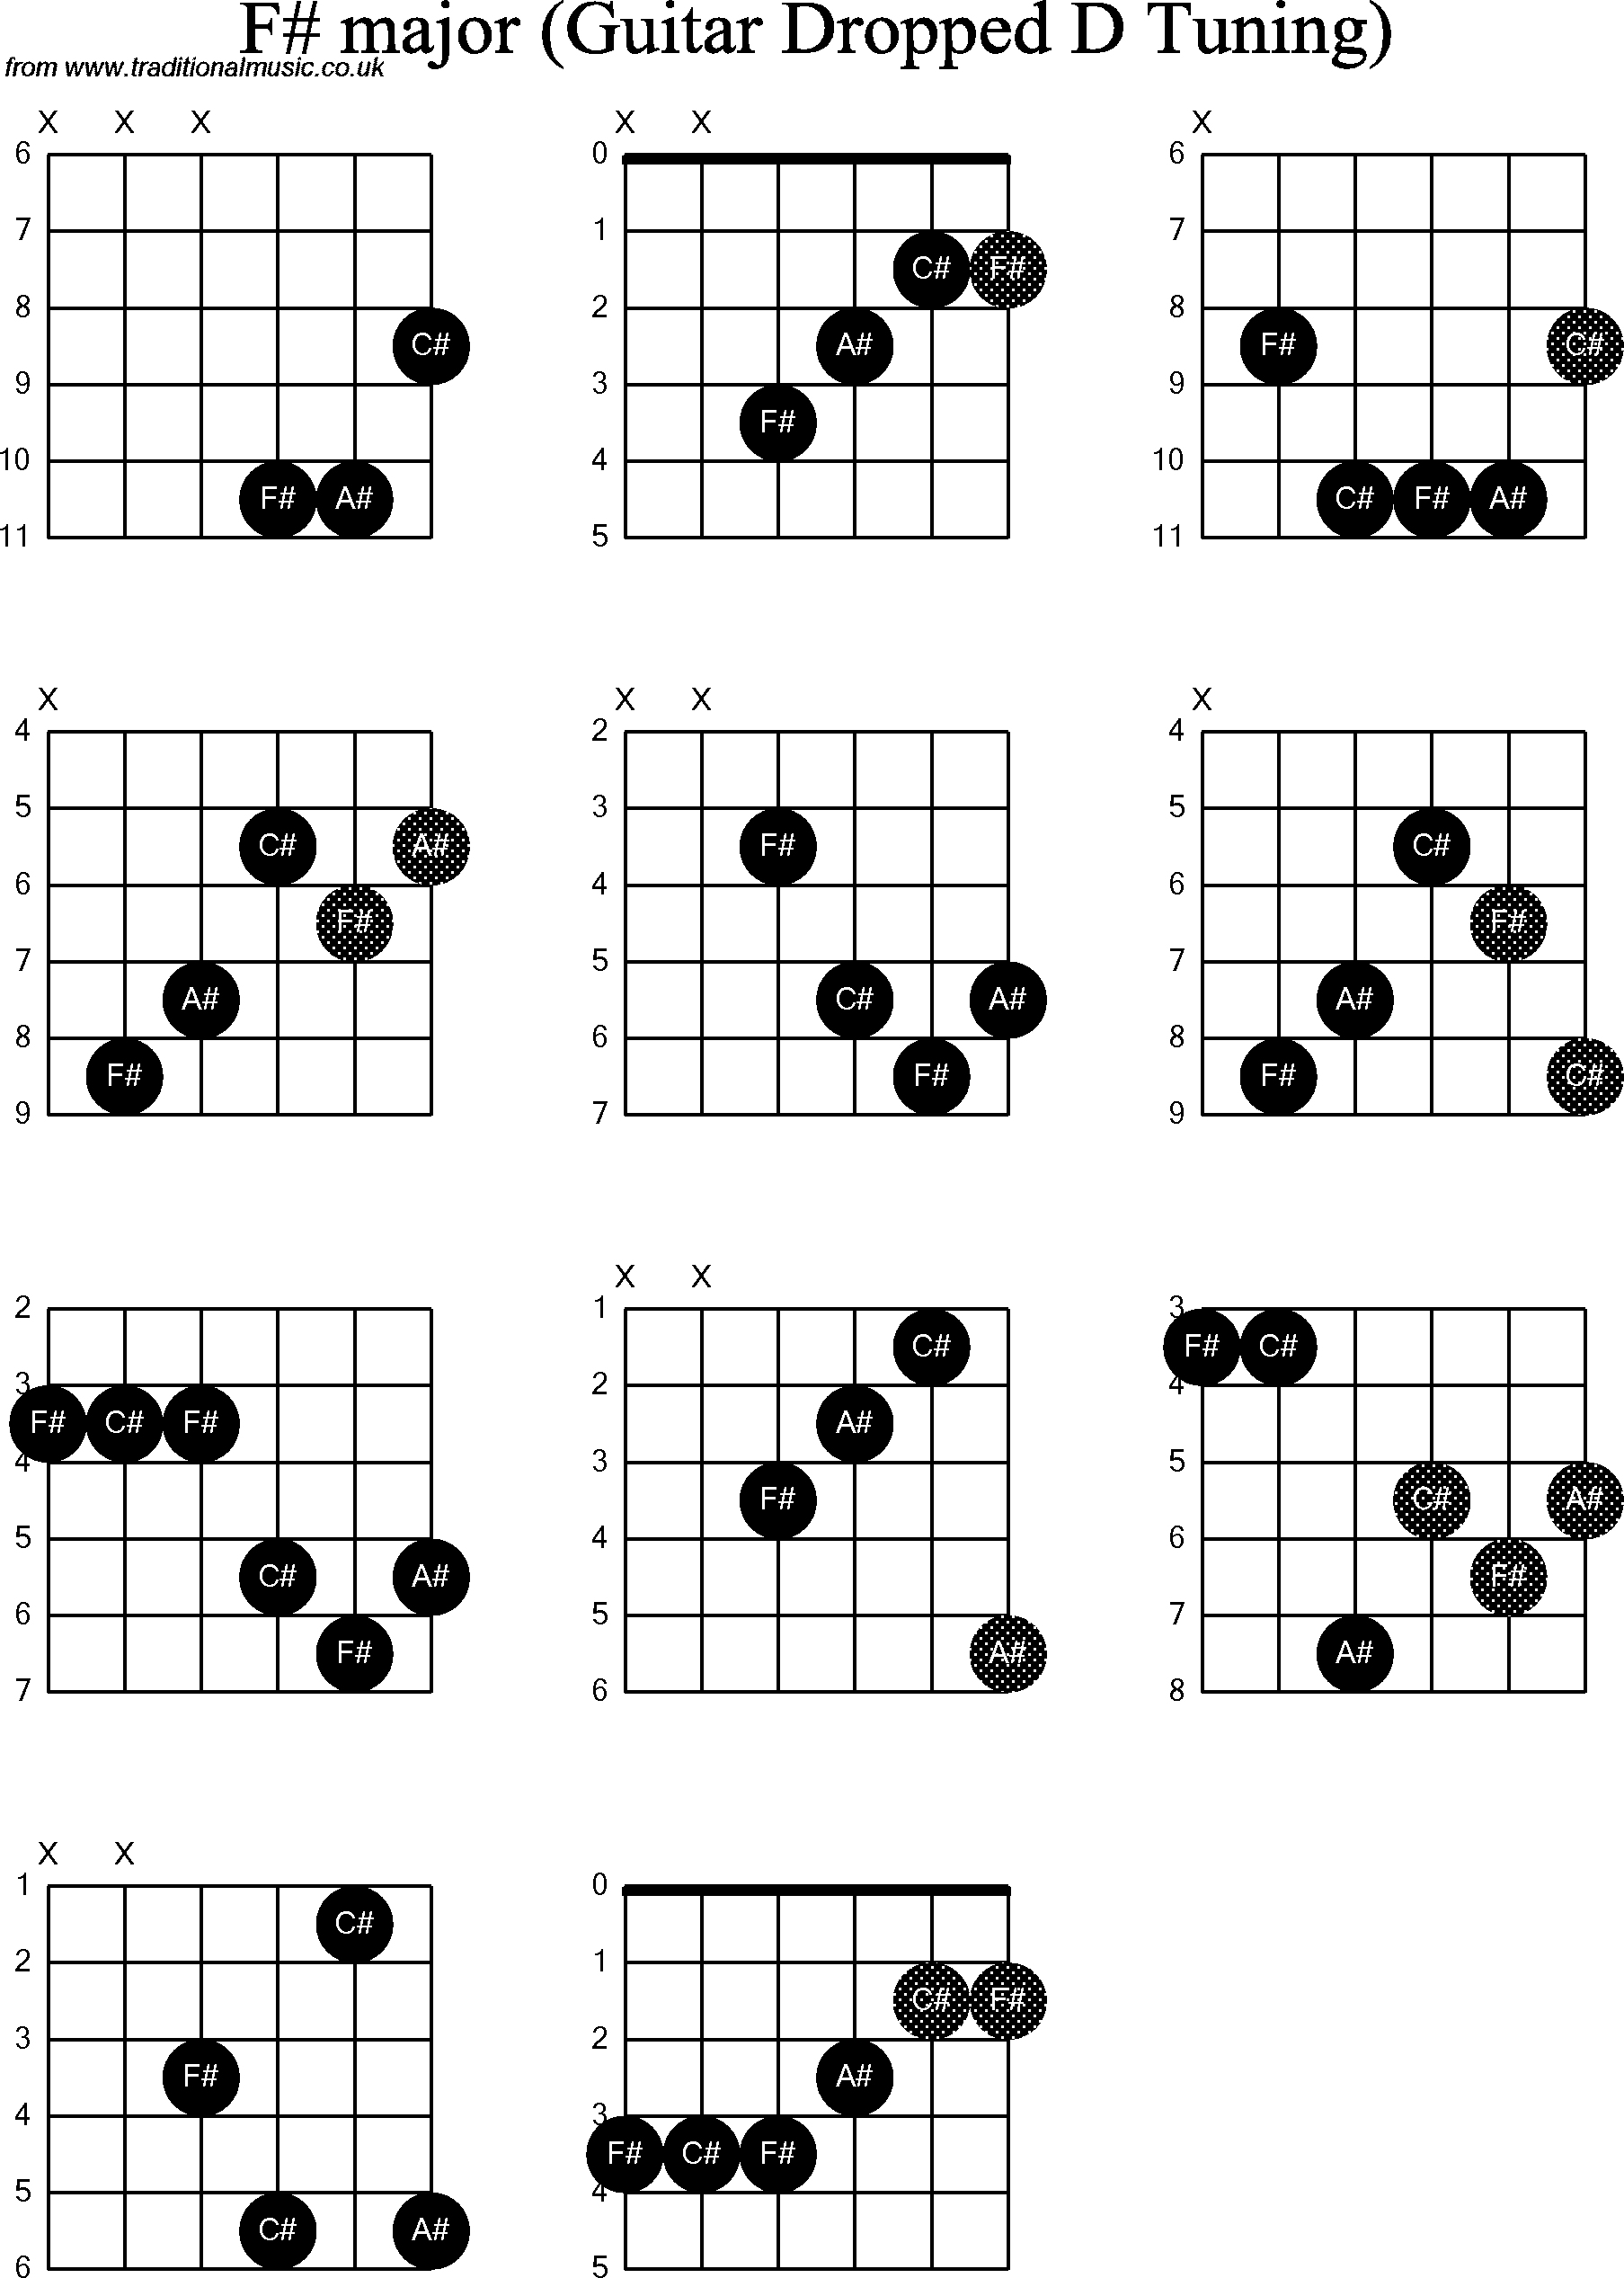 Chord diagrams for dropped D Guitar(DADGBE), F Sharp